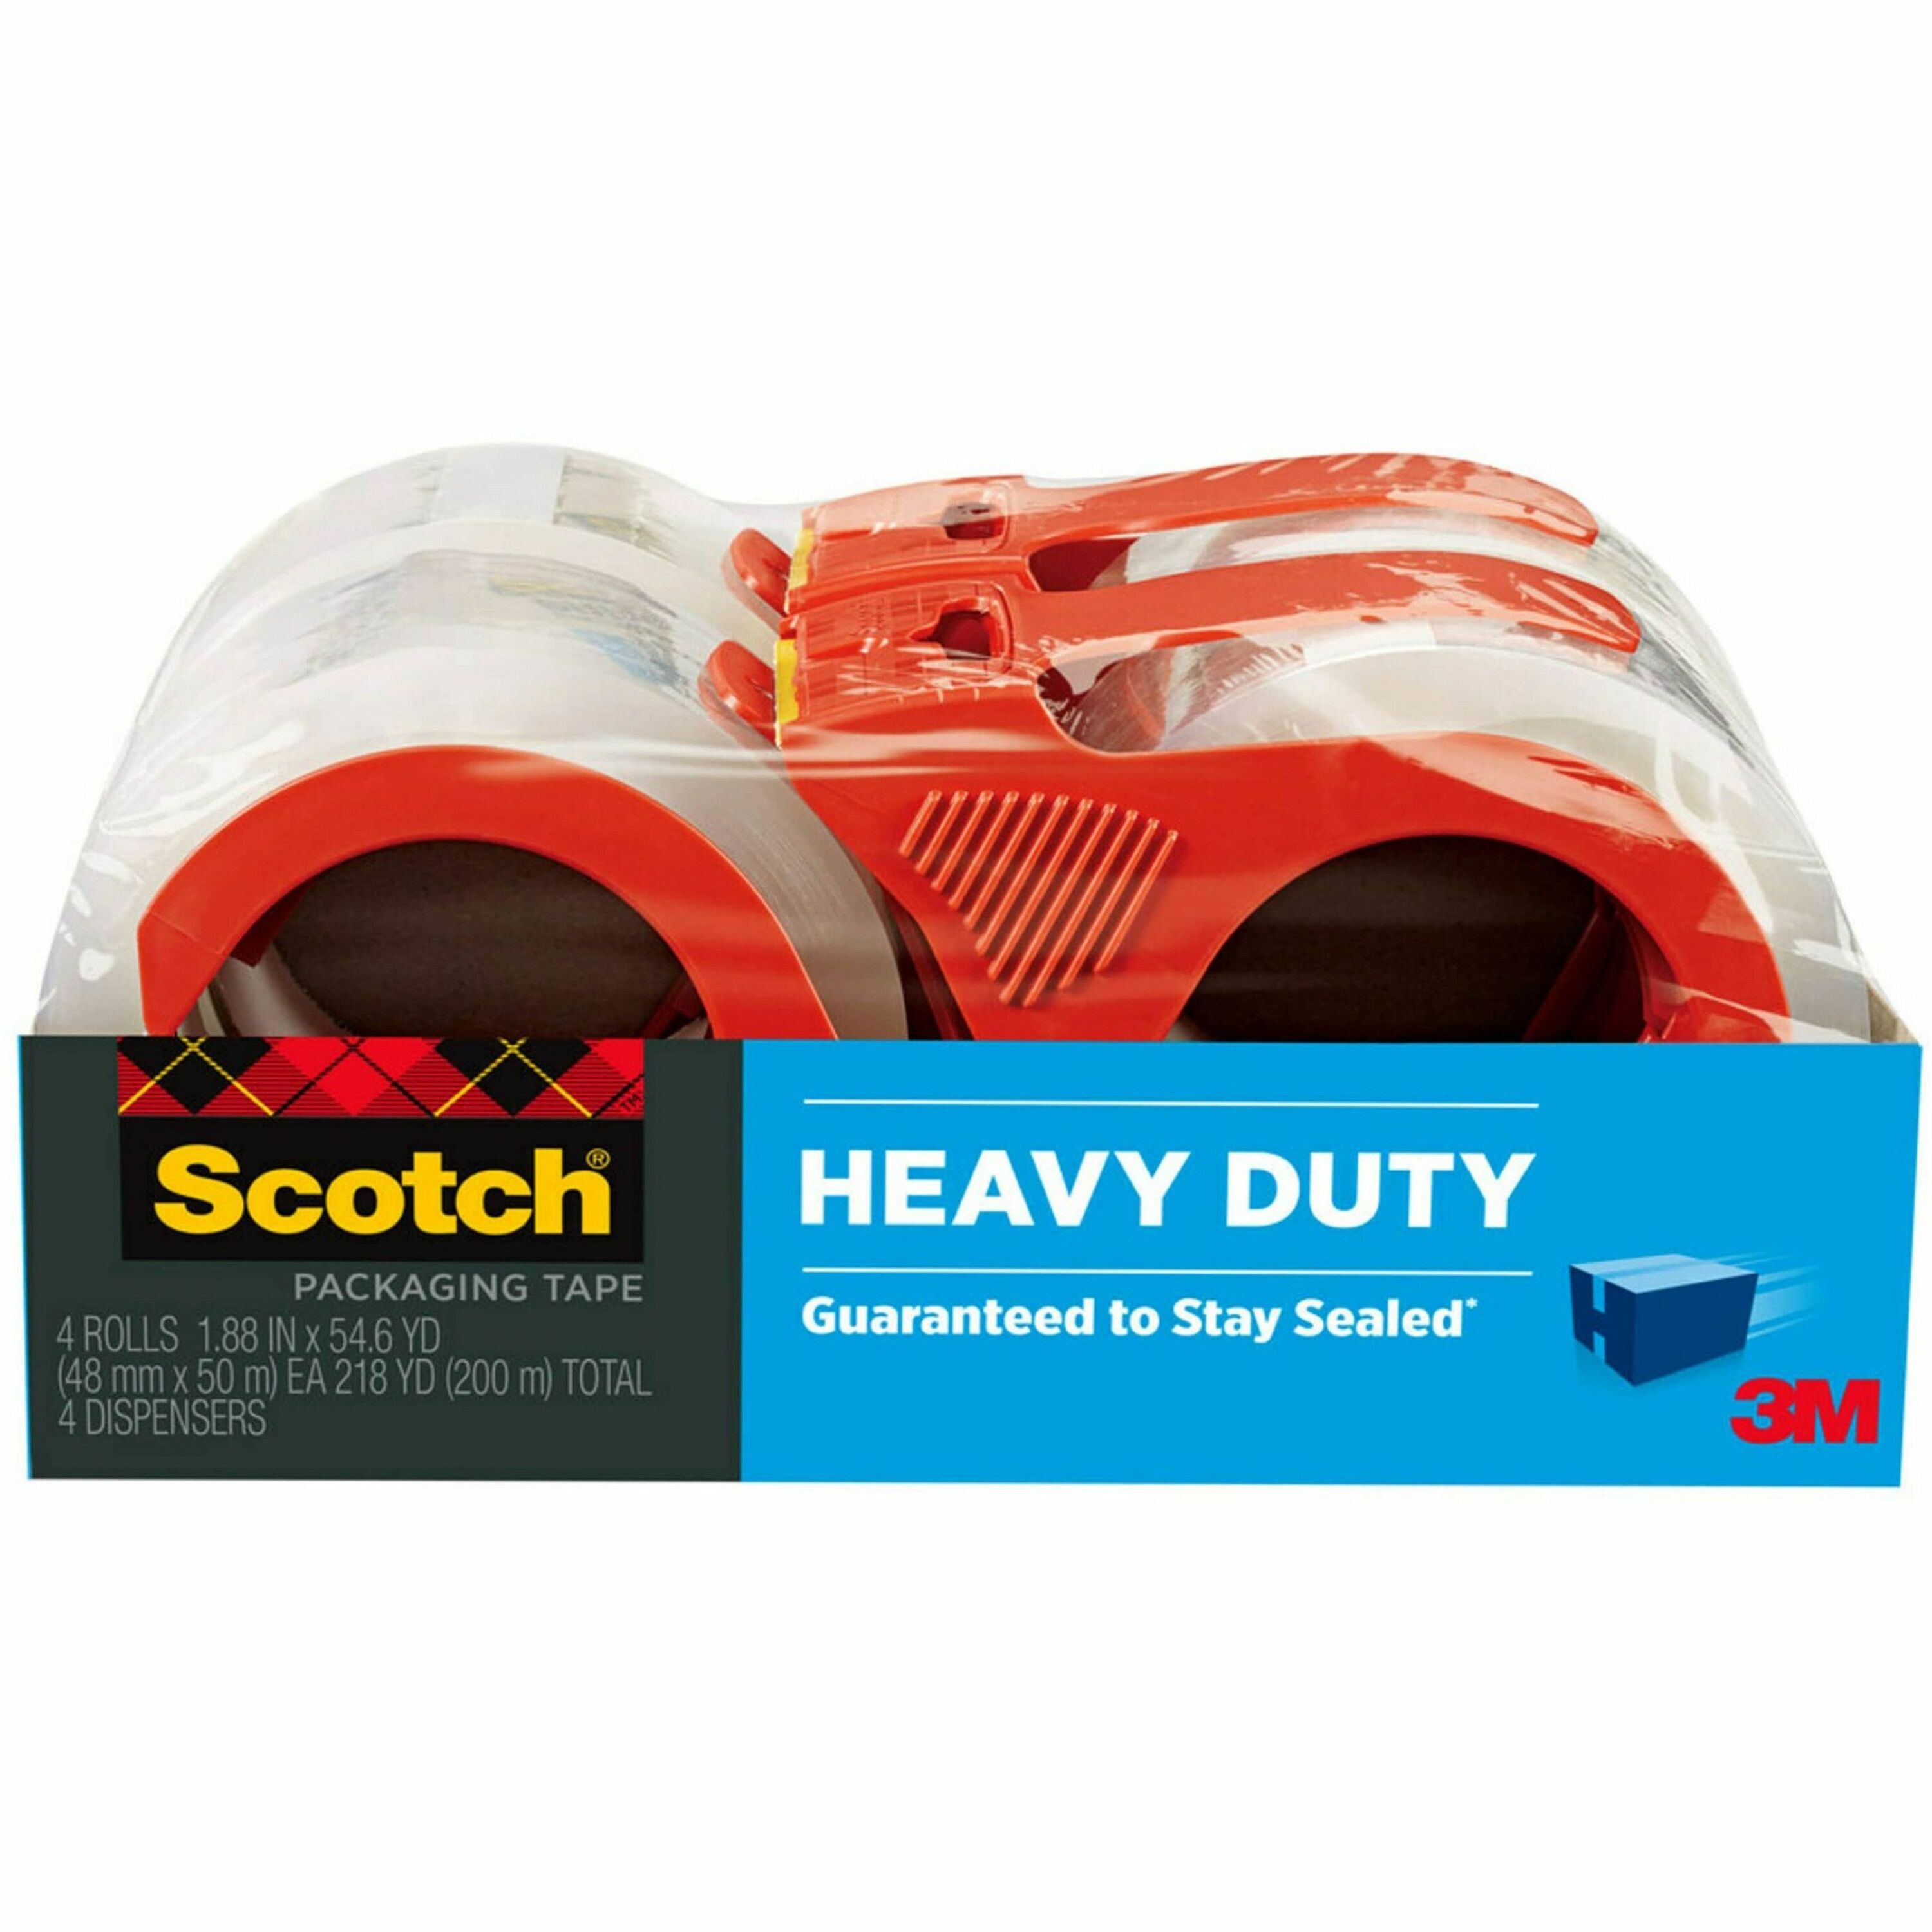 Scotch Gift Wrap Tape, Invisible, 0.75 in. x 300 in., 3 Dispensers/Pack